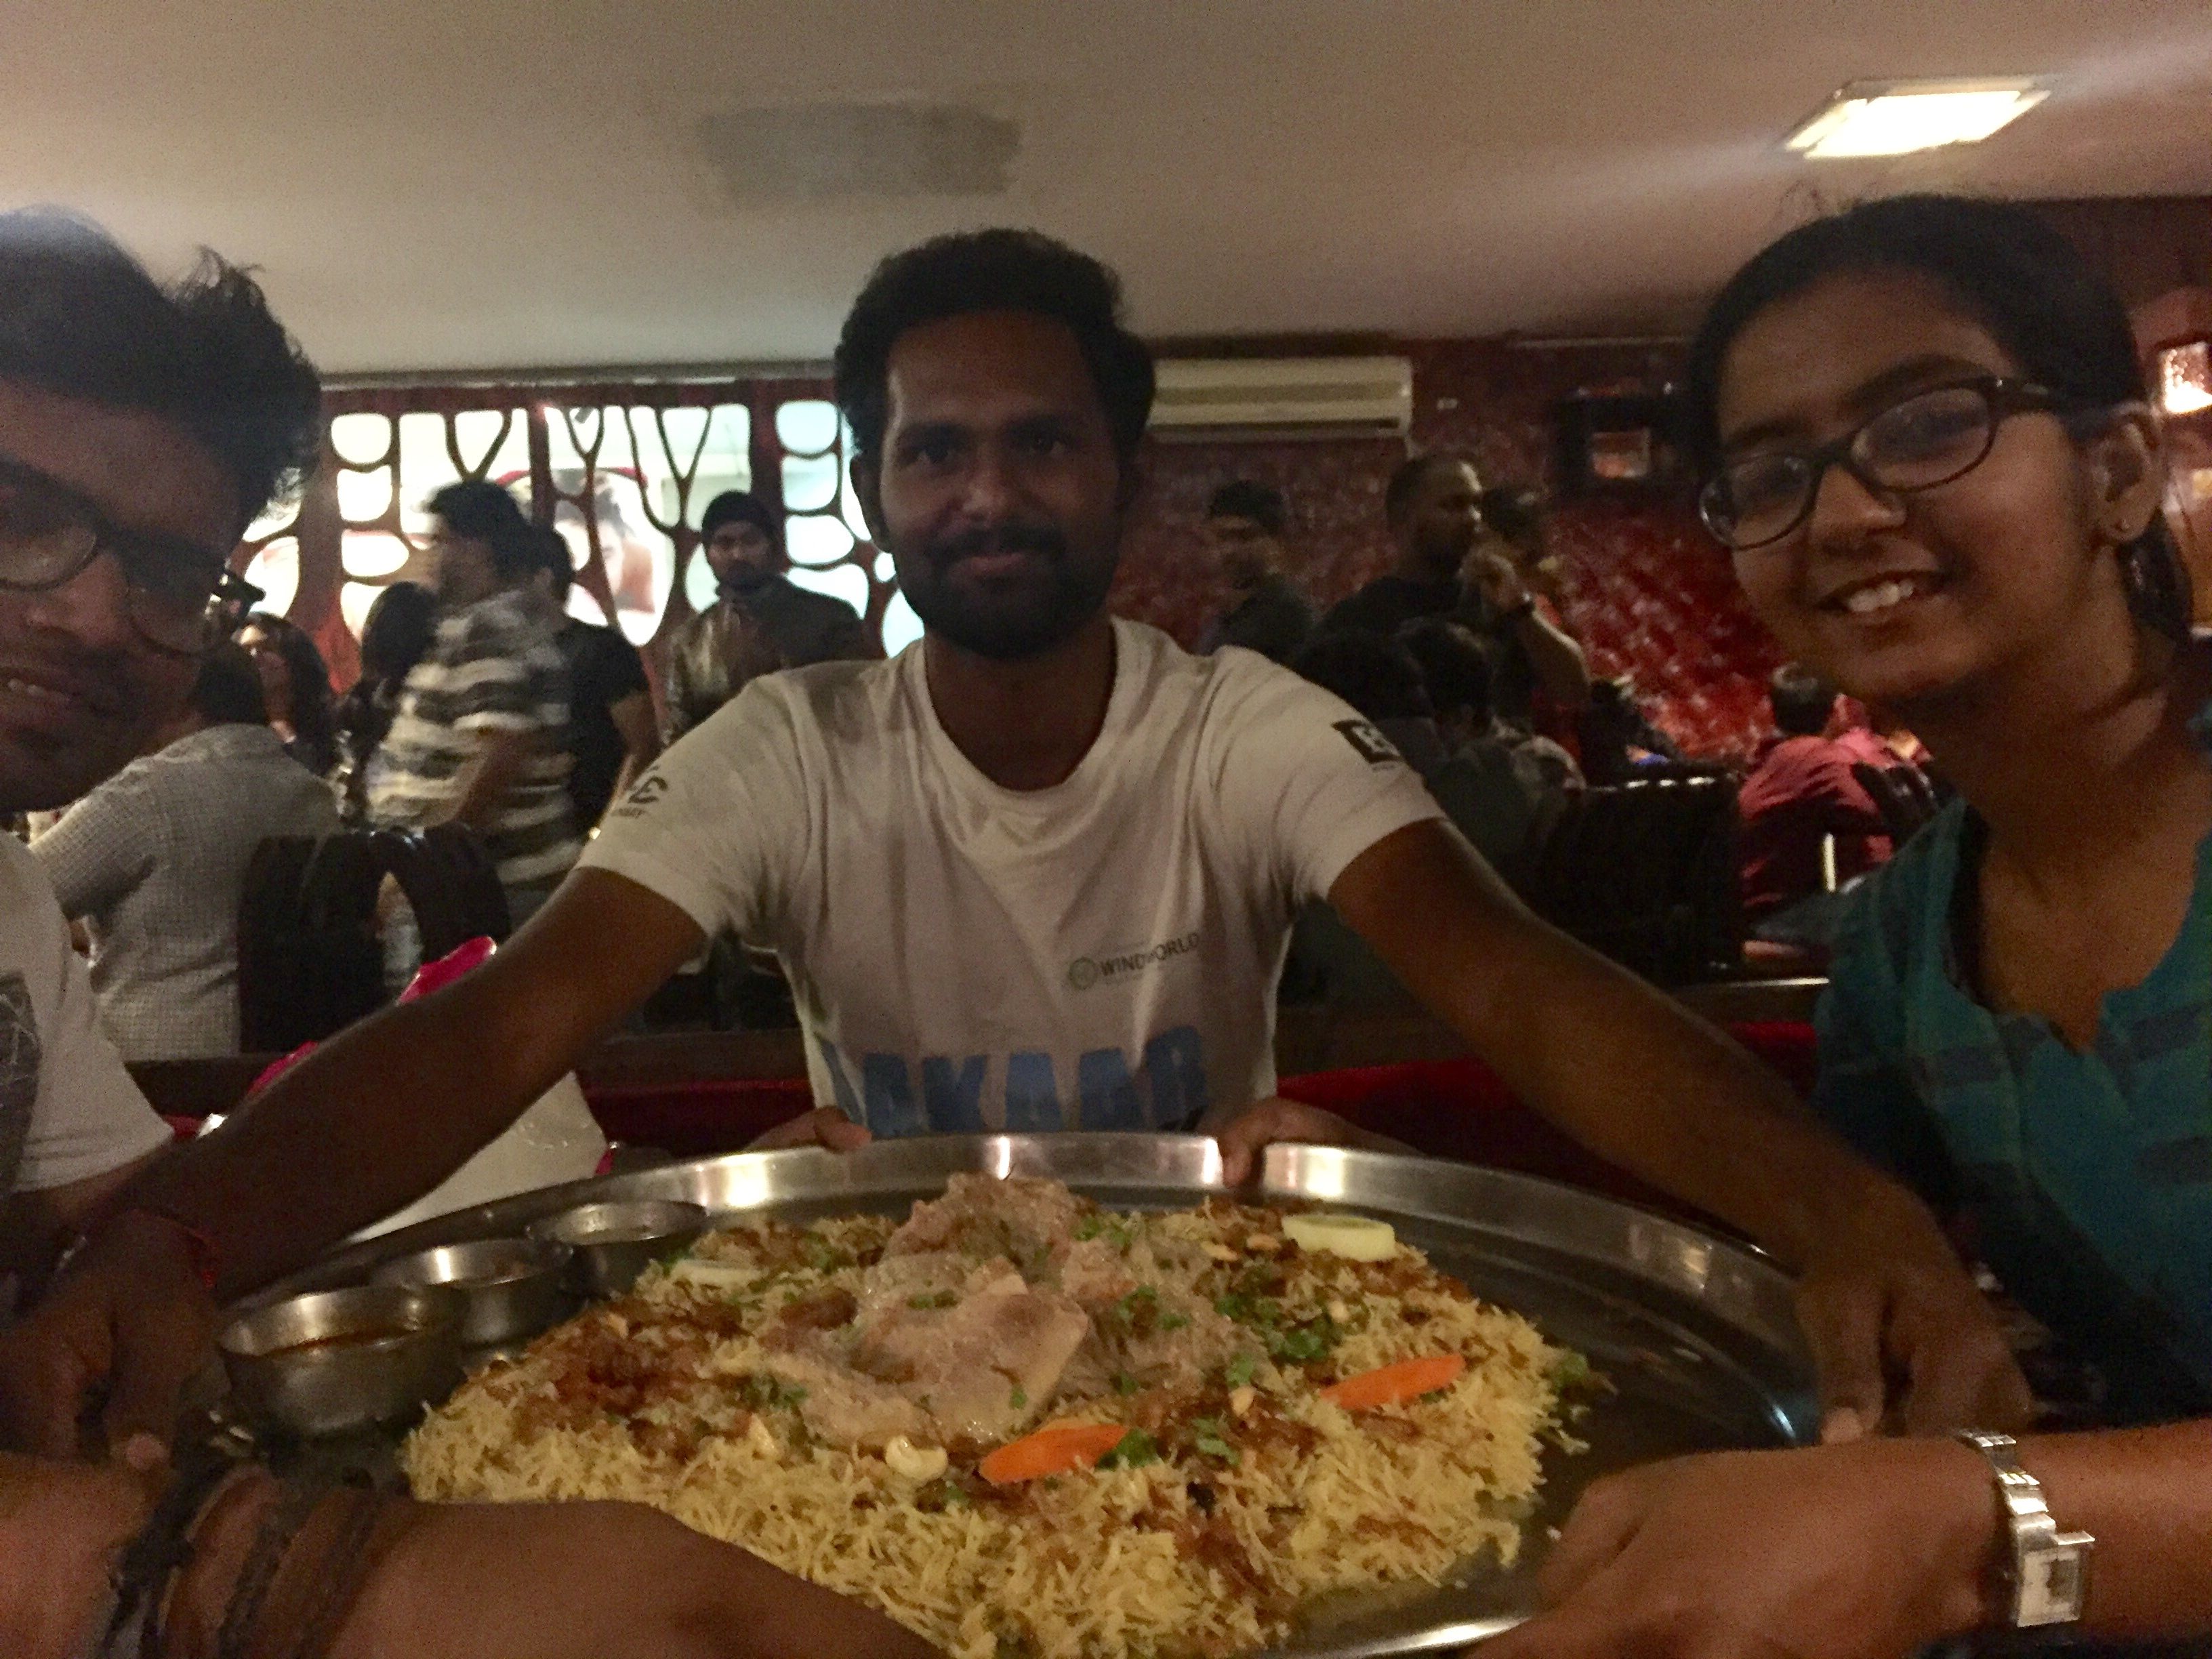 Myself in the center holding both hands in the mandi plate with my friends